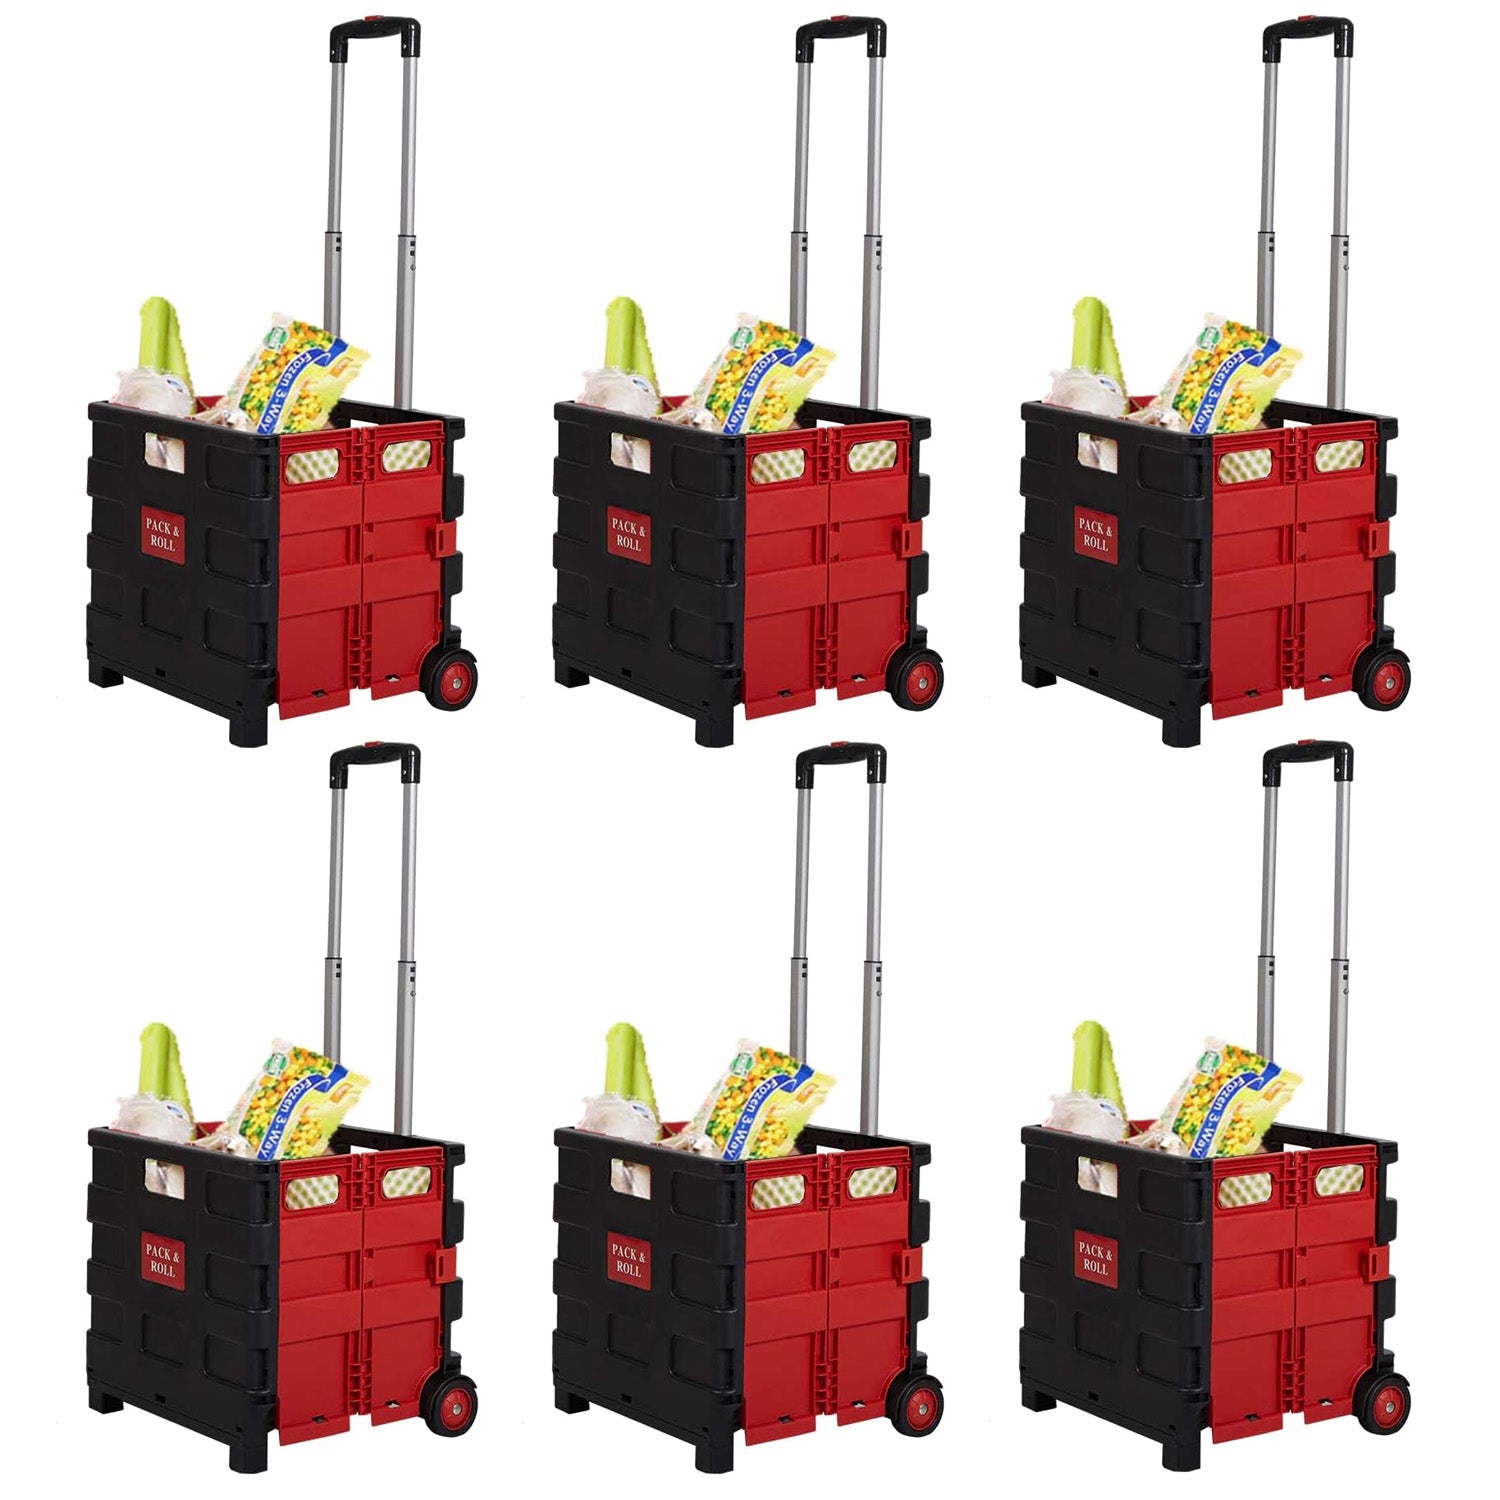 6 Pack Collapsible Rolling Crate Utility Cart 56L Foldable Grocery Cart with Wheels (Red, Large)